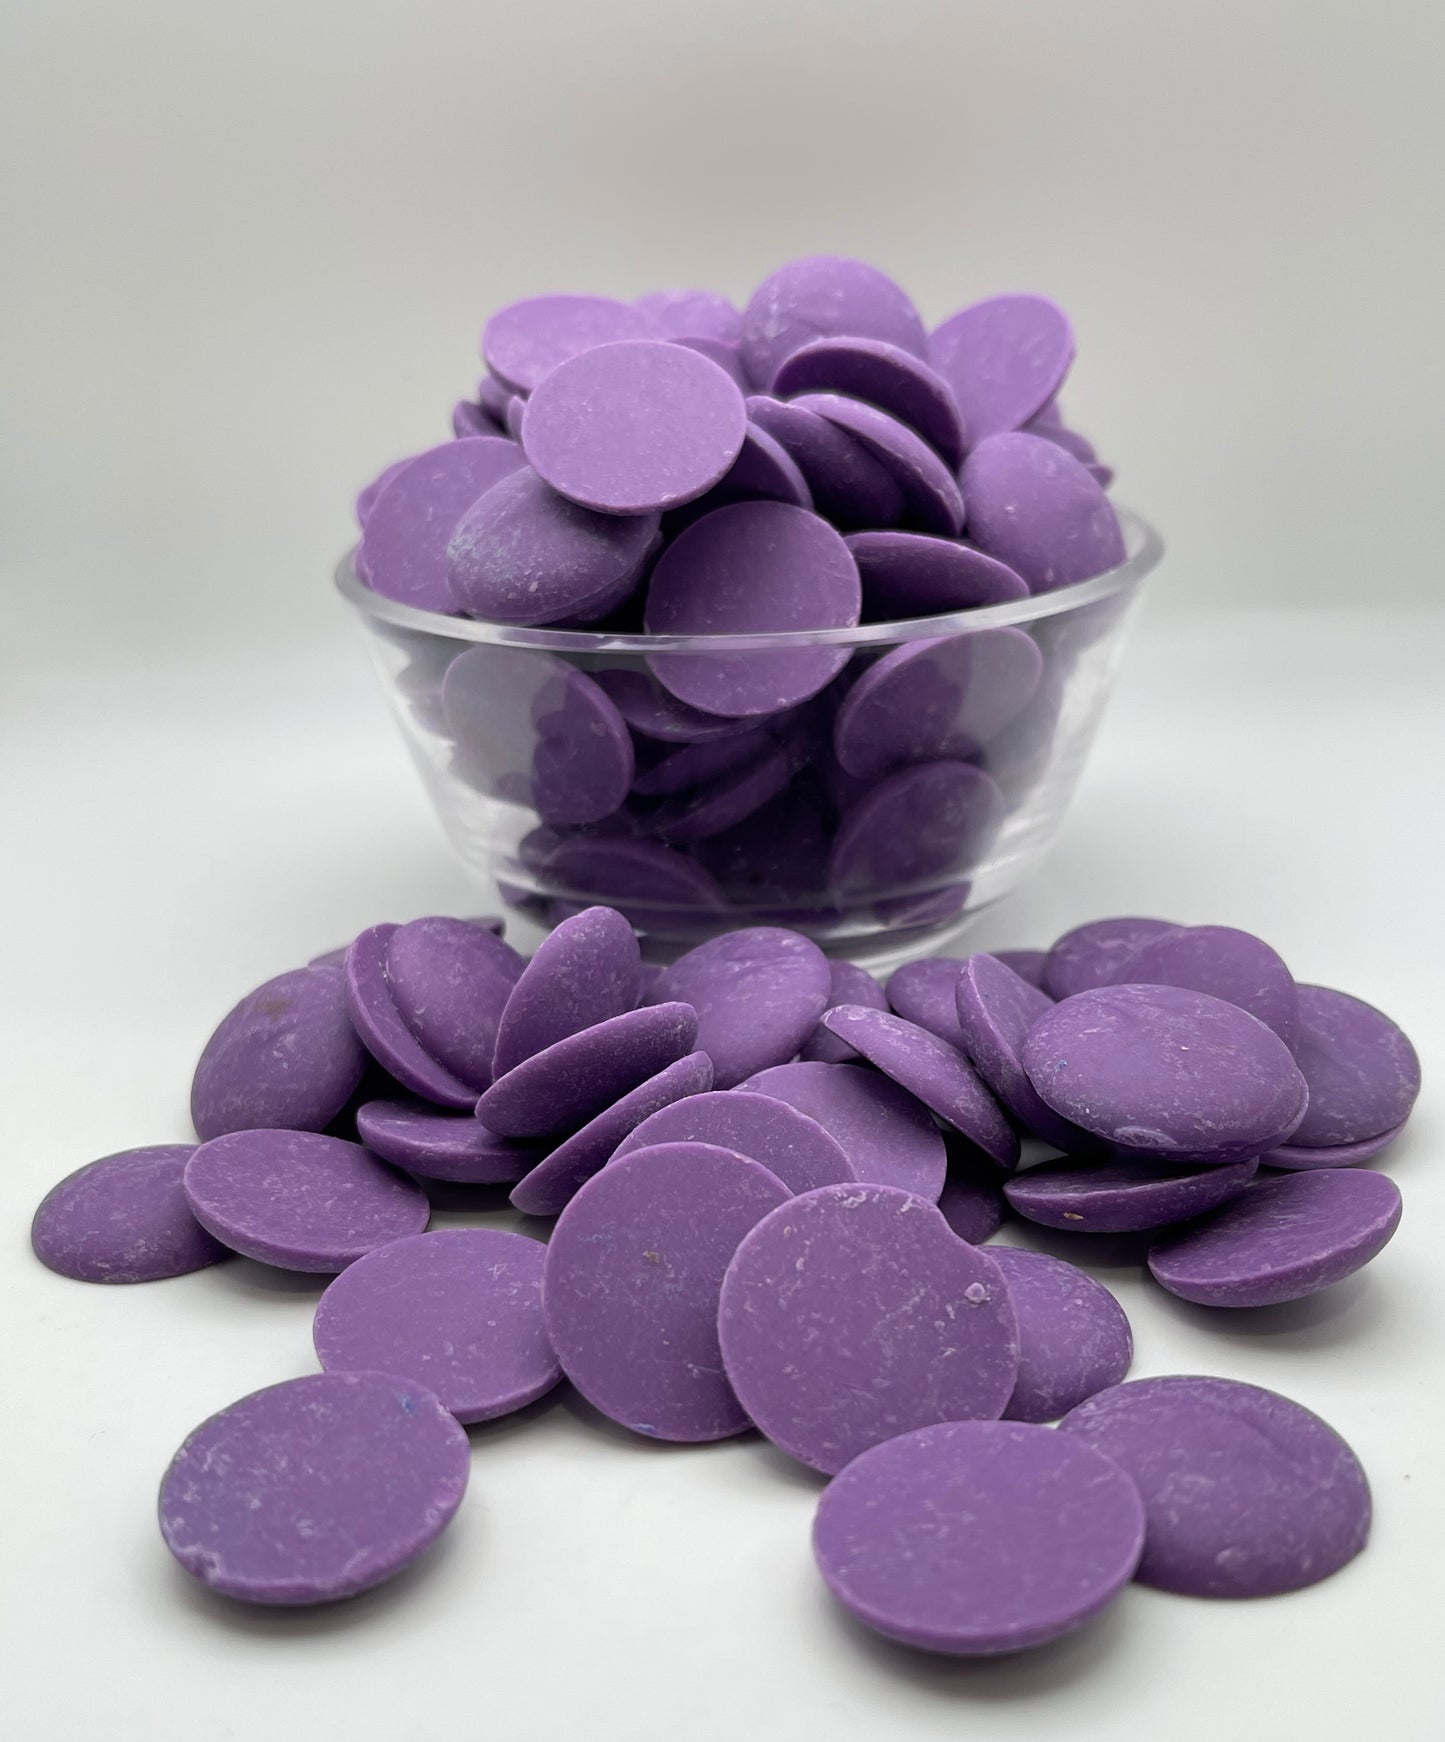 Merckens Chocolate Candy Melts Orchid